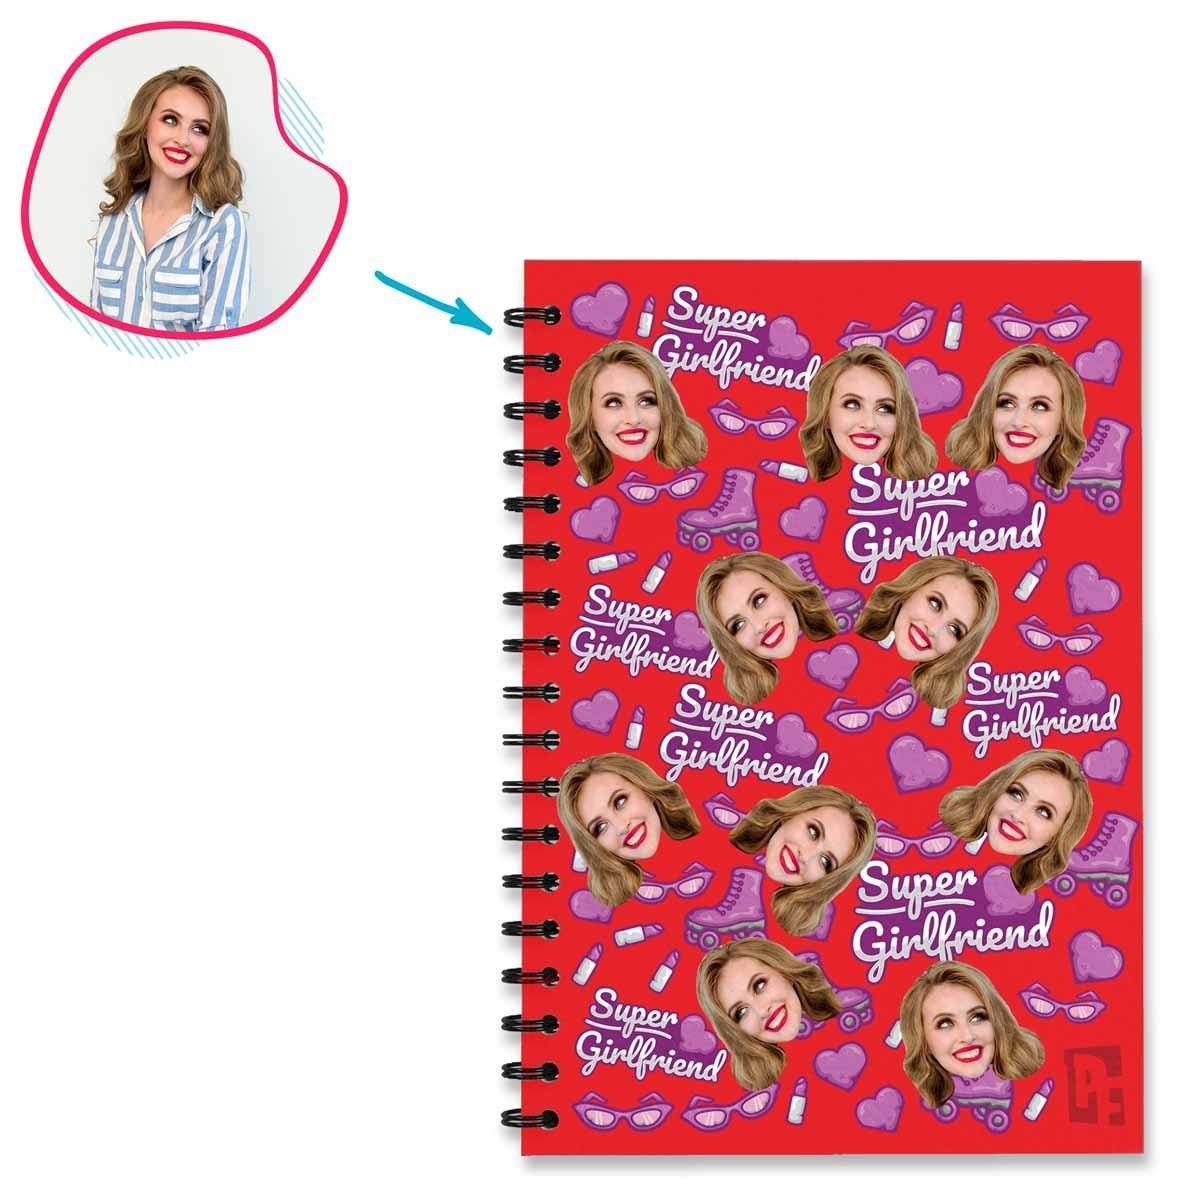 Red Auntie personalized notebook with photo of face printed on them